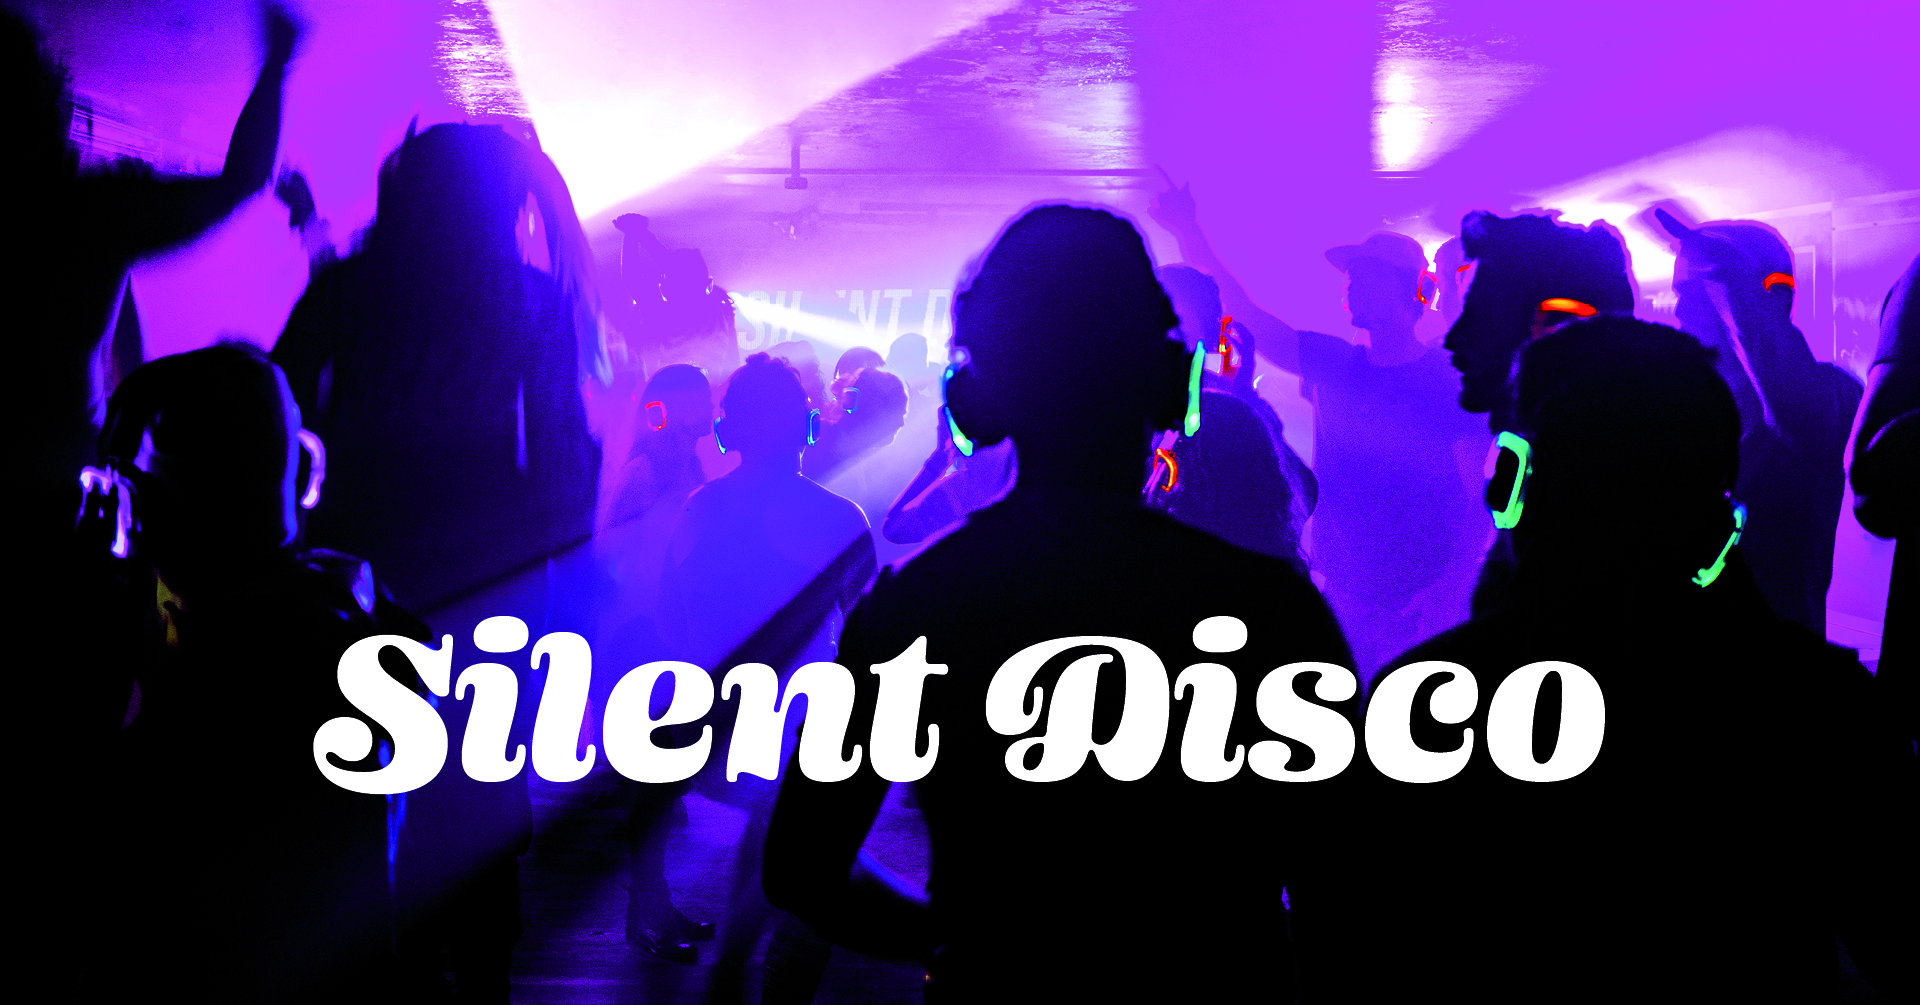 Image: People at a silent disco